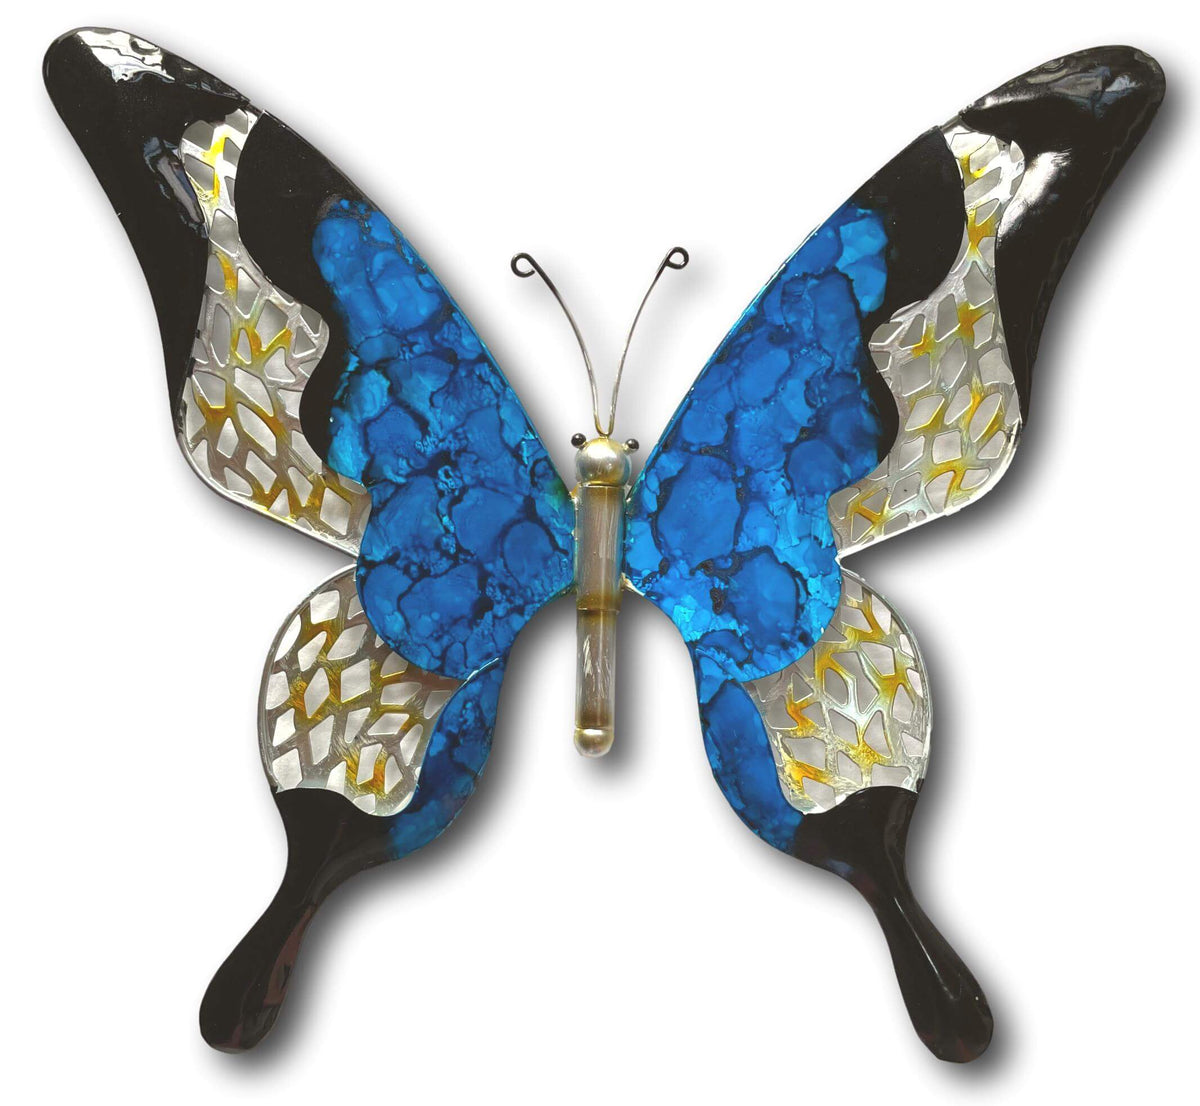 TWO COLOURFUL BUTTERFLY’S WALL ART SET - HANDMADE METAL ART + SINGING BOWLS AND MEDITATION